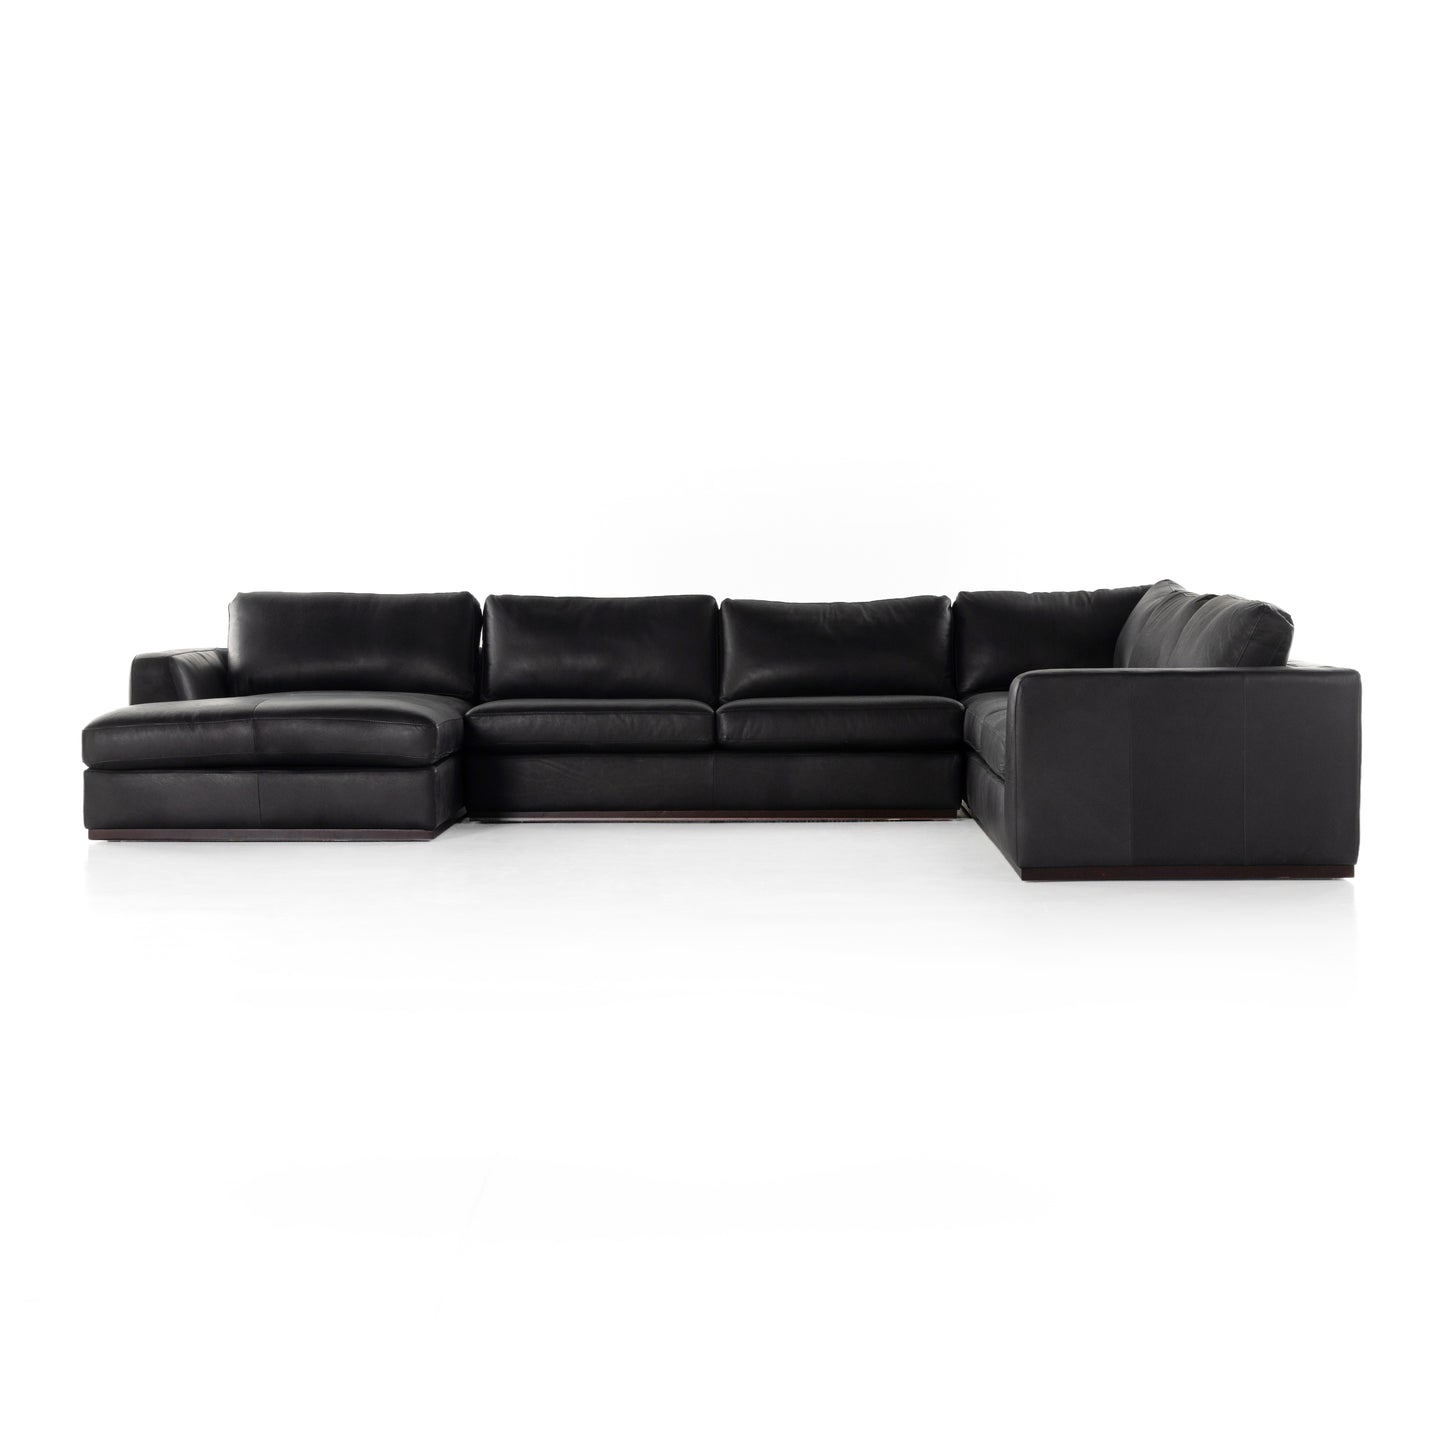 Load image into Gallery viewer, Colt 4-PC Sectional Heirloom Black / Left FacingSectional Four Hands  Heirloom Black Left Facing  Four Hands, Mid Century Modern Furniture, Old Bones Furniture Company, Old Bones Co, Modern Mid Century, Designer Furniture, https://www.oldbonesco.com/
